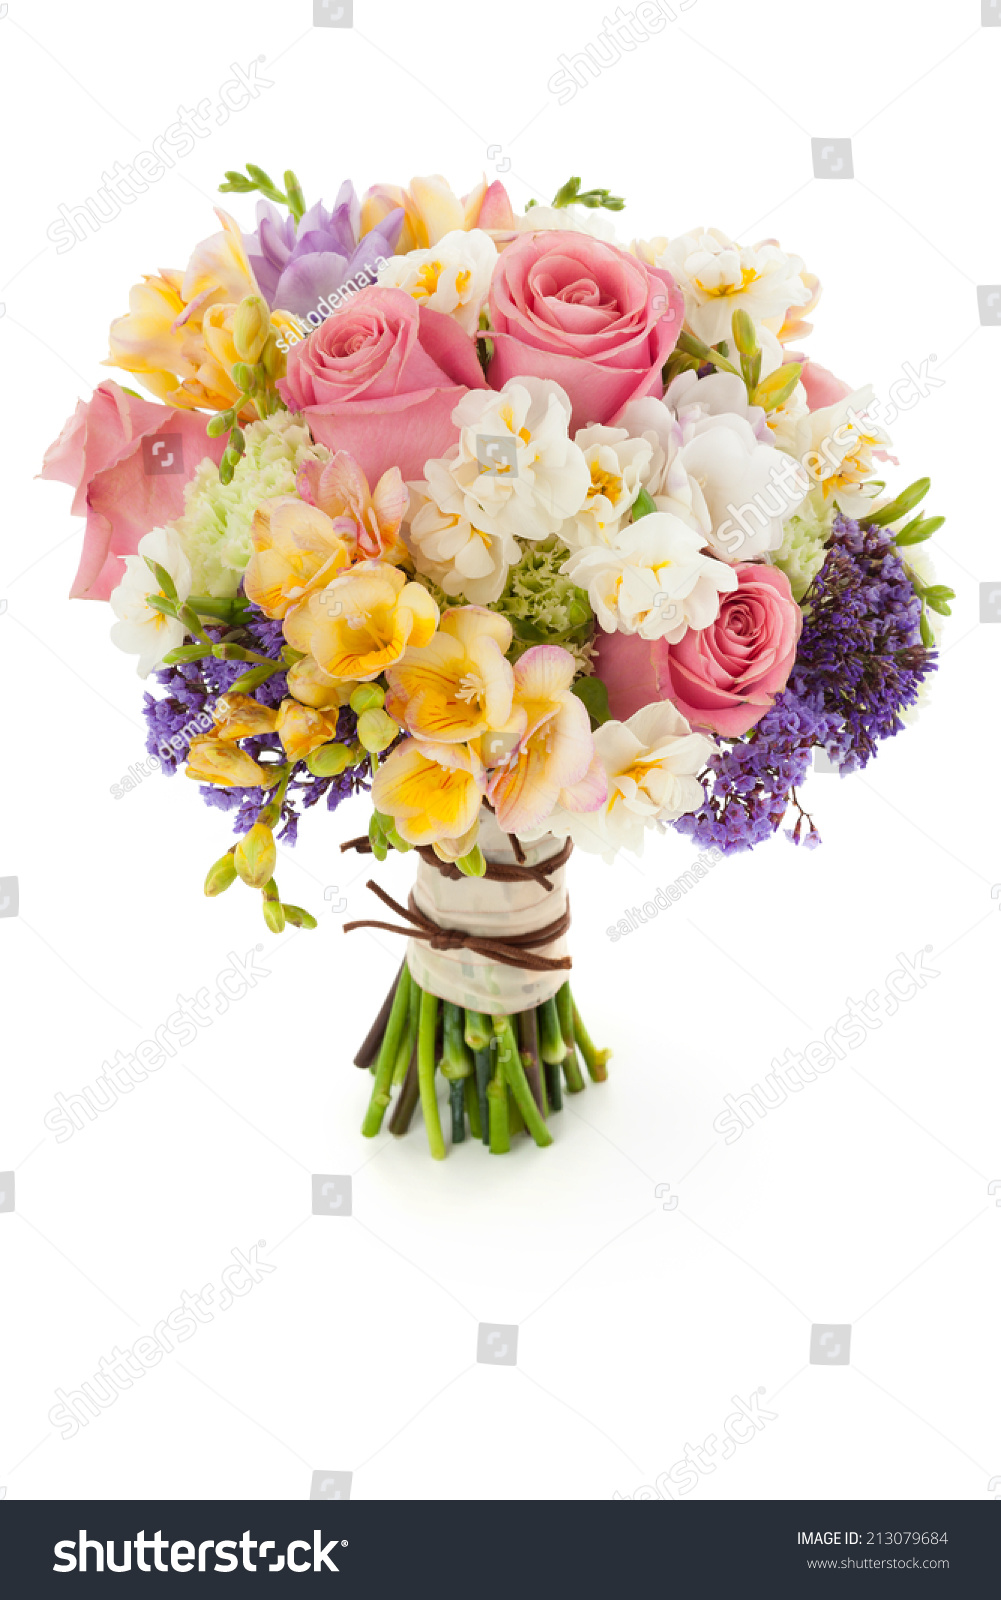 Pastel colors wedding bouquet made of Roses, Freesia, Carnation and Limonium flowers isolated on white. #213079684